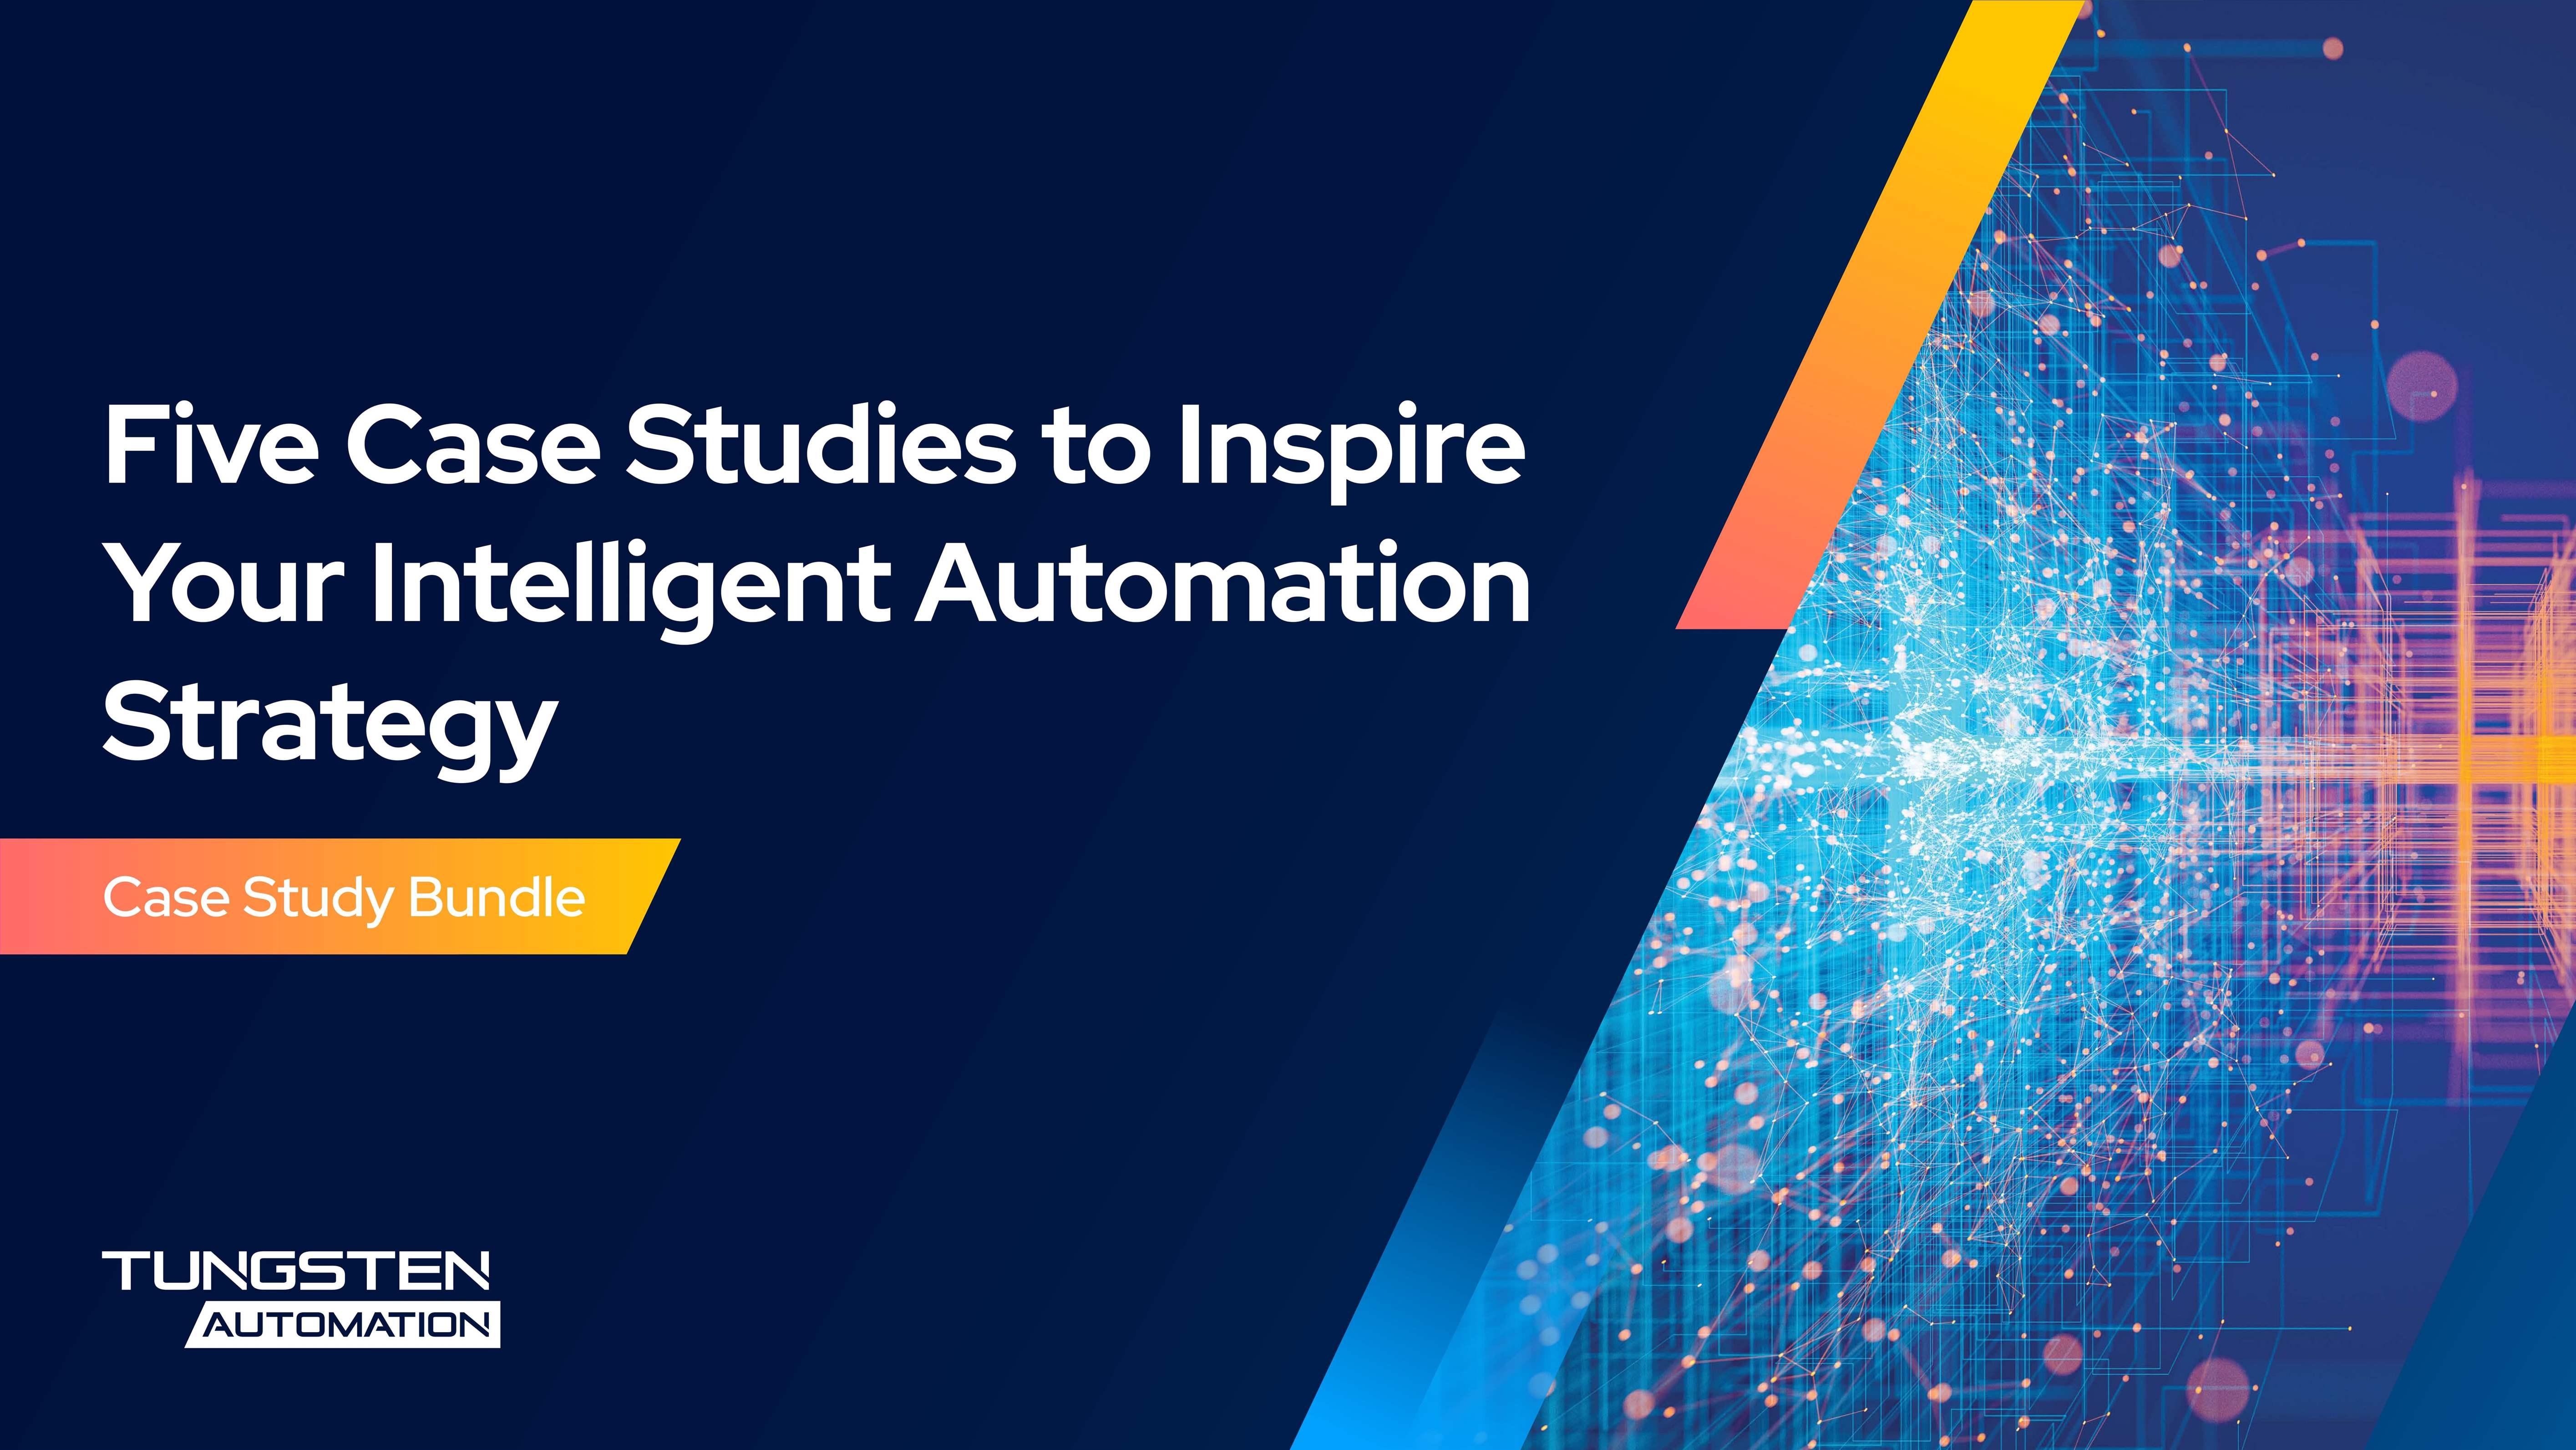 Five Case Studies to Inspire Your Intelligent Automation Strategy